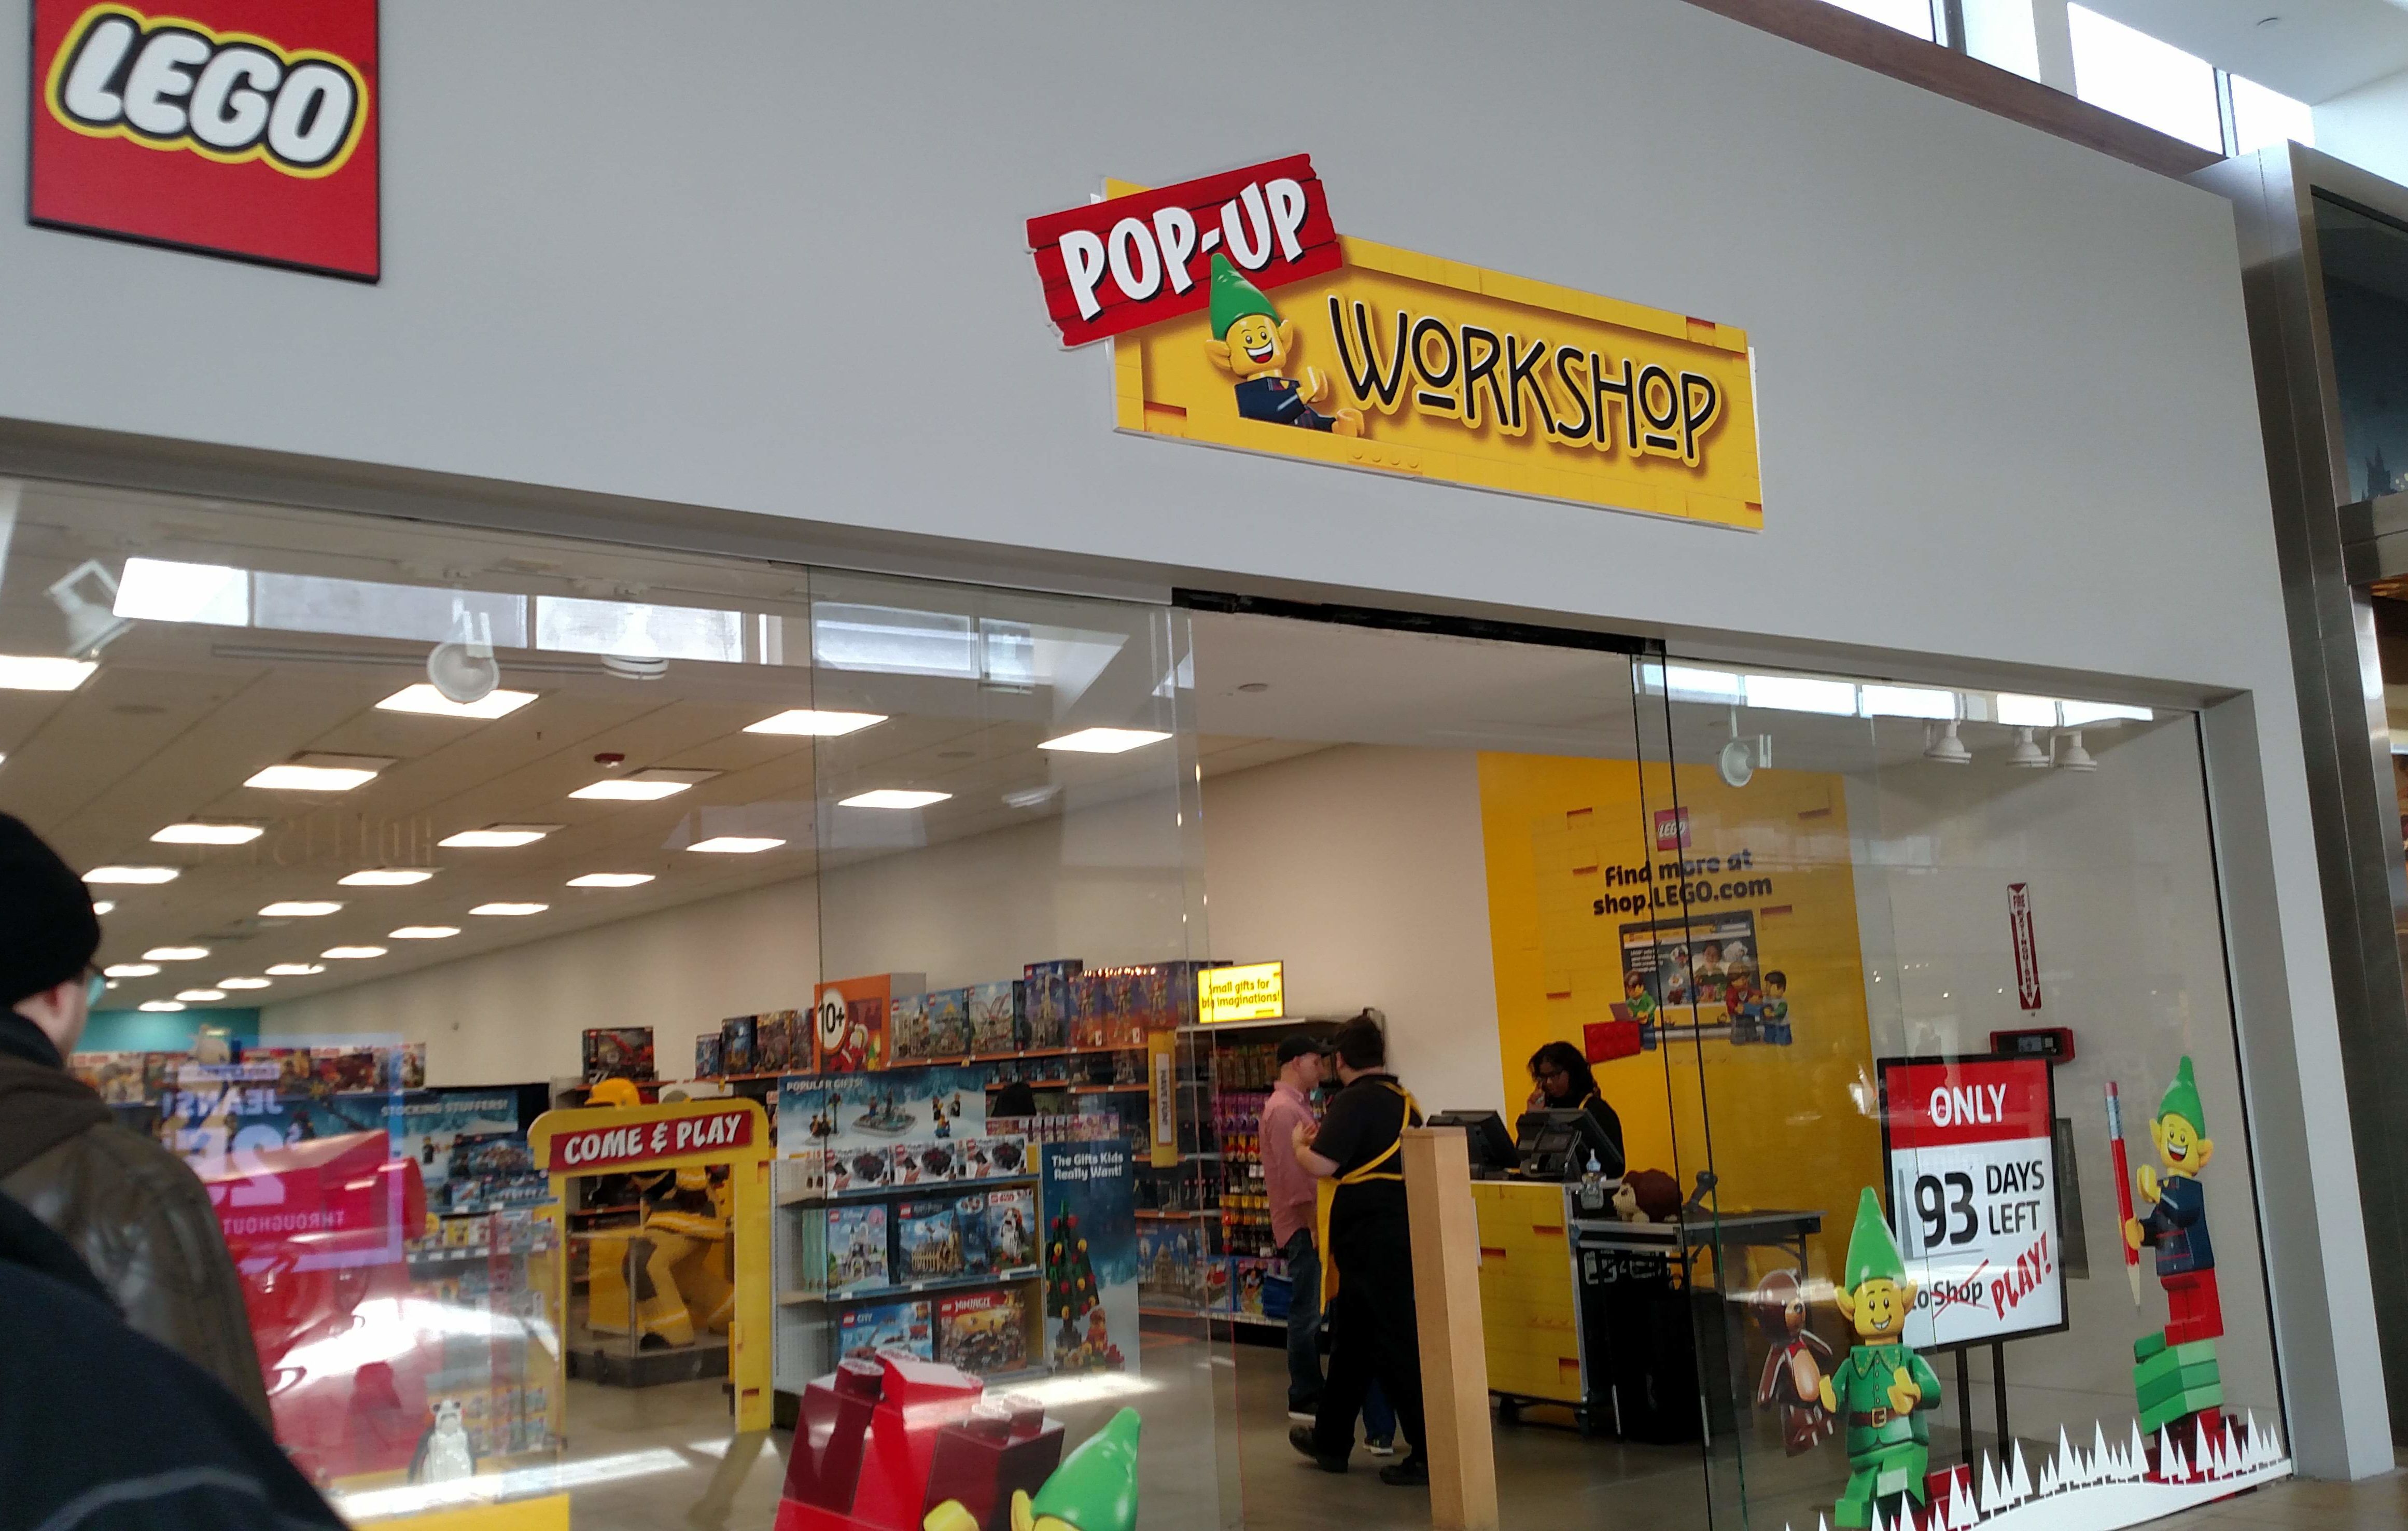 F.Kr. craft Forbipasserende LEGO Pop-Up Workshop Open in Smith Haven Mall, Lake Grove, NY – I LUG NY